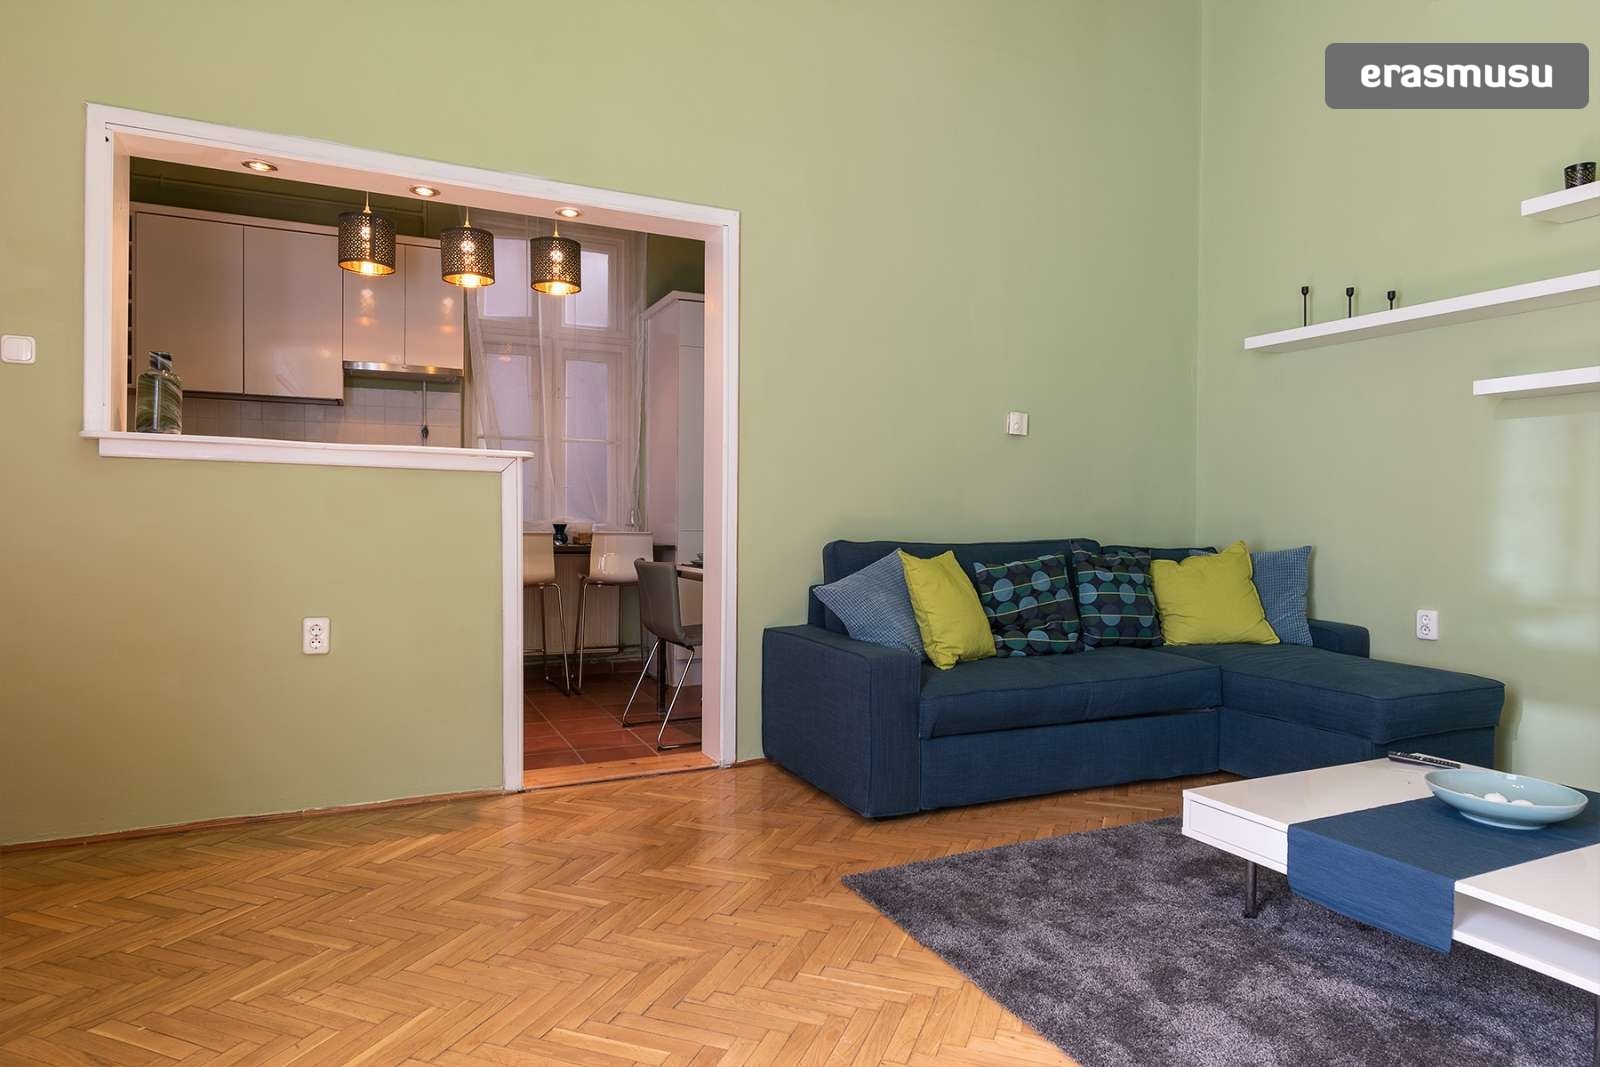 Bright 1 Bedroom Apartment With Loft Level For Rent In Ferencvaros